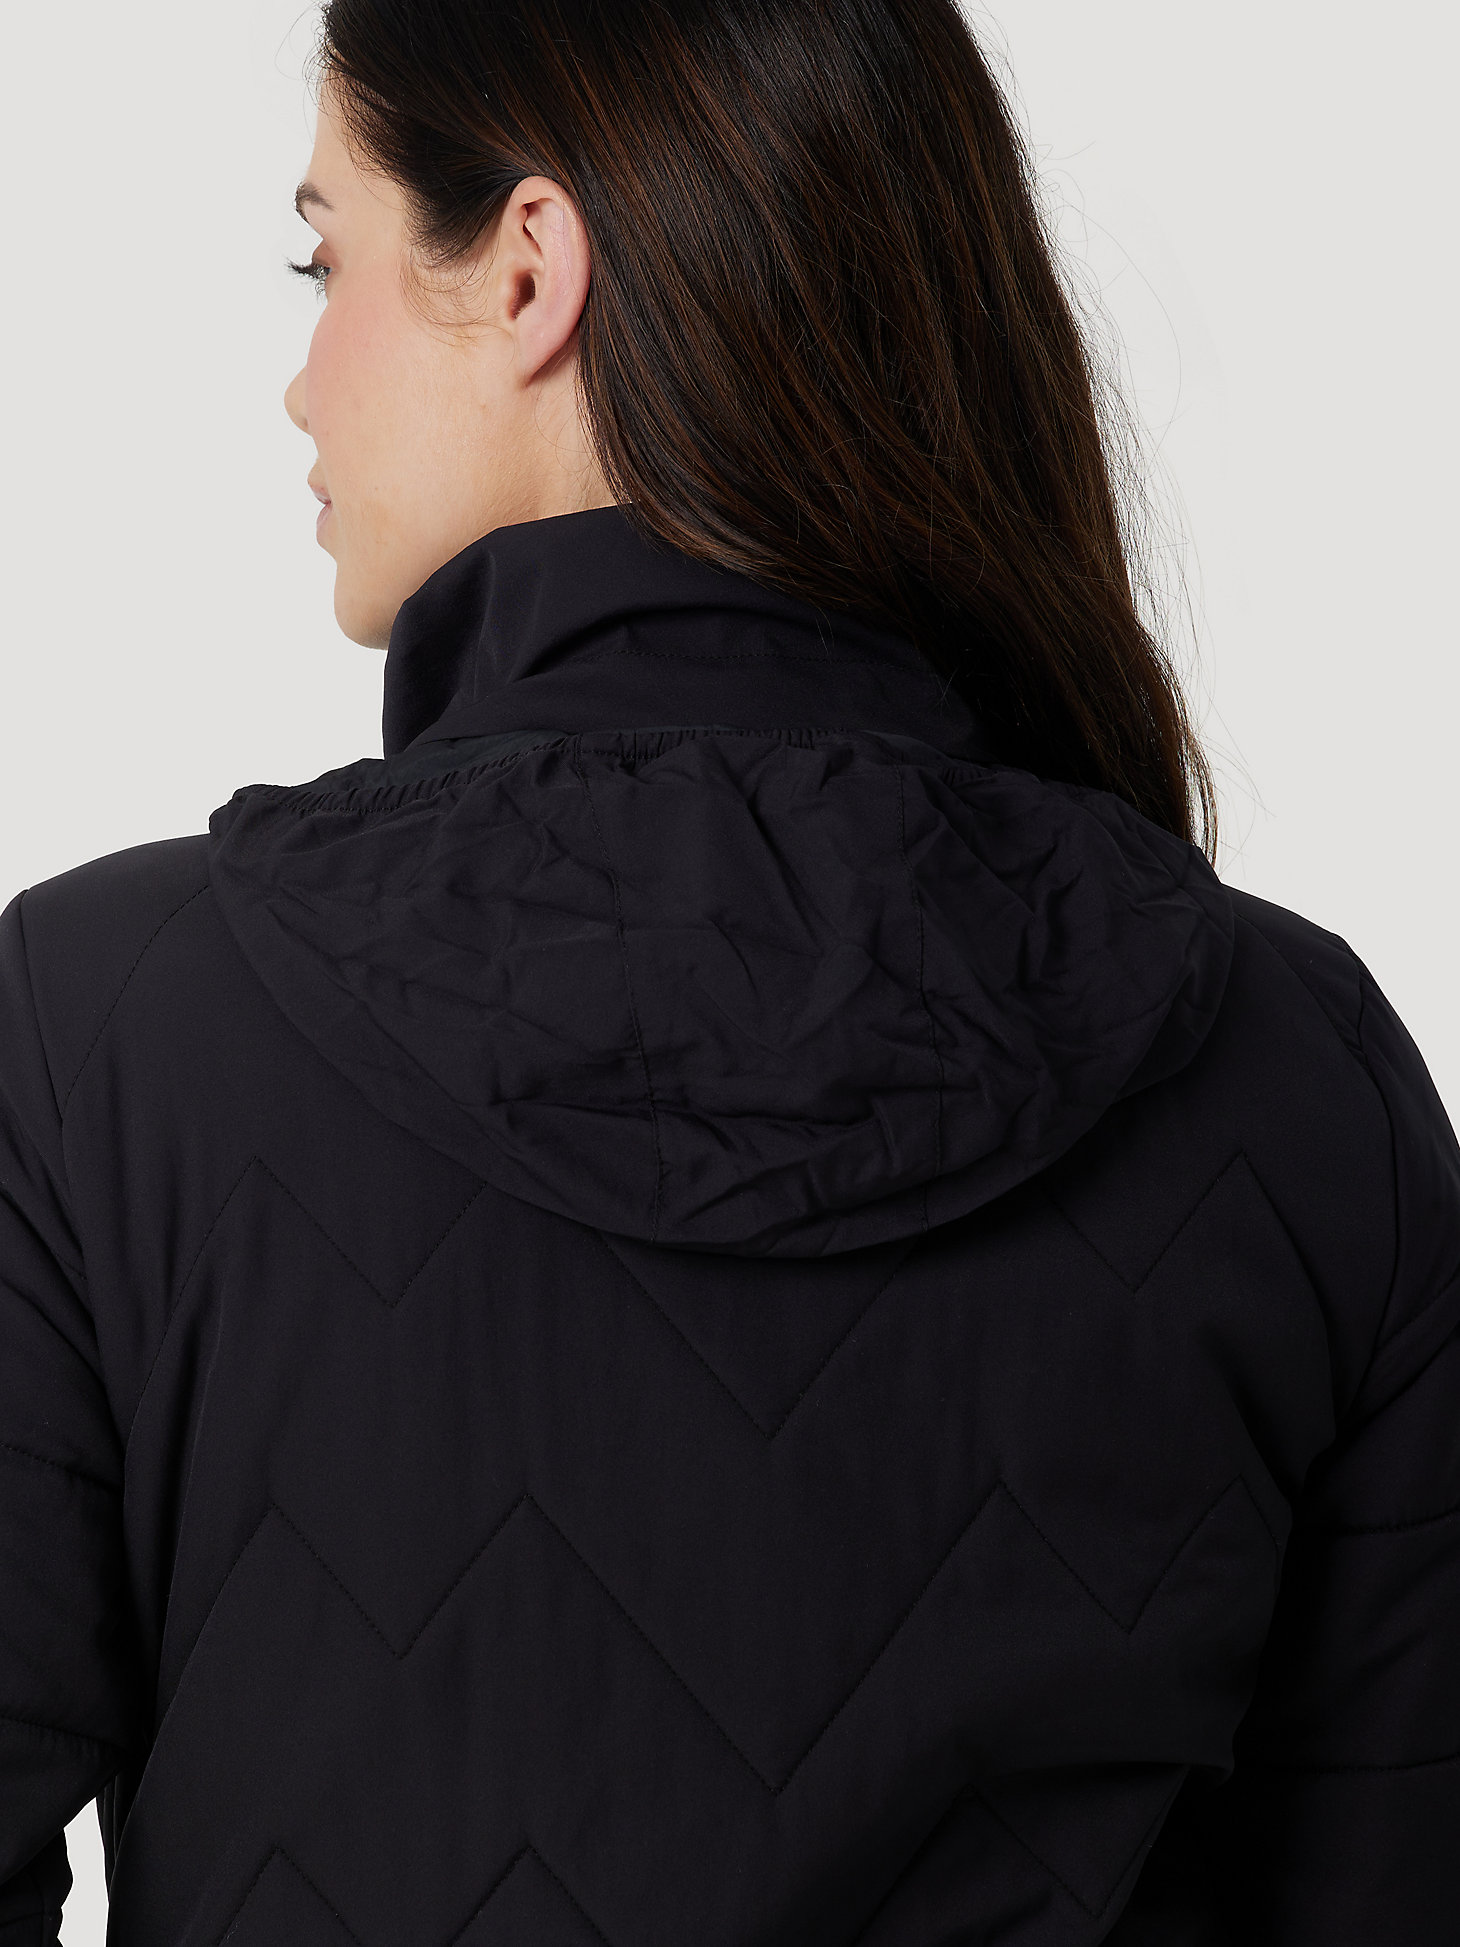 ATG Womens Packable Quilted Jacket:Jet Black:XXL alternative view 4